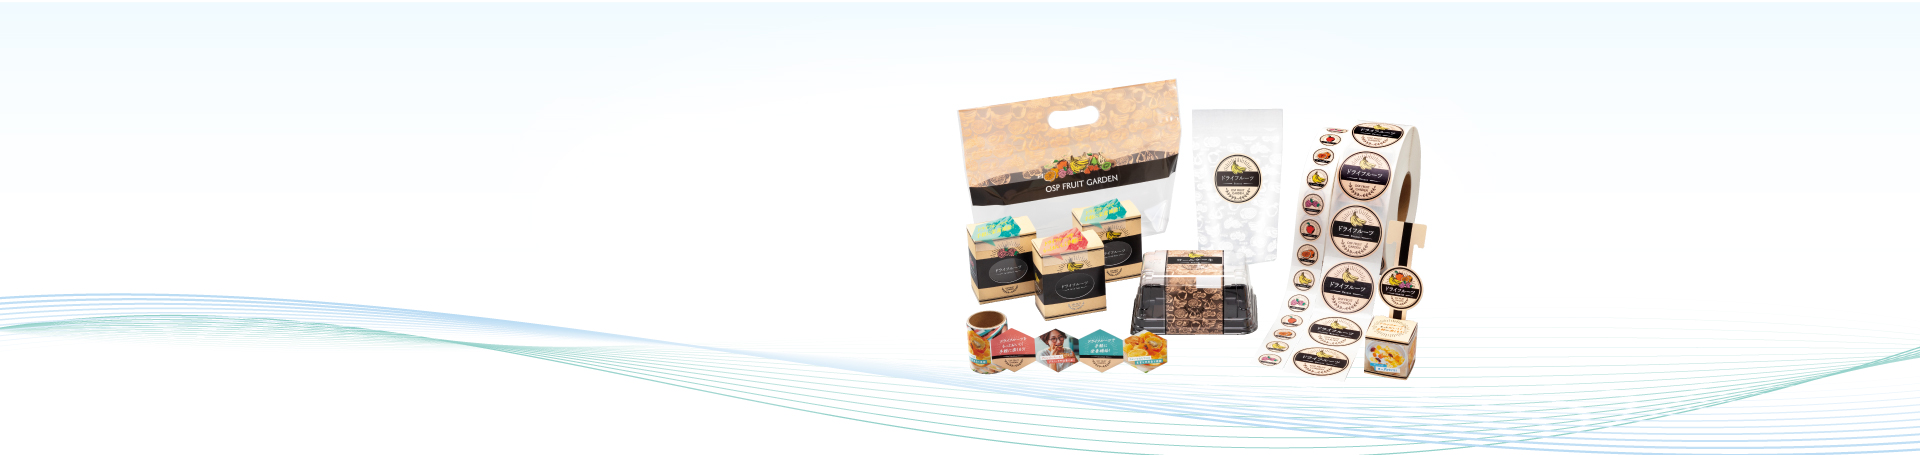 OSP's packaging solutions that support daily life